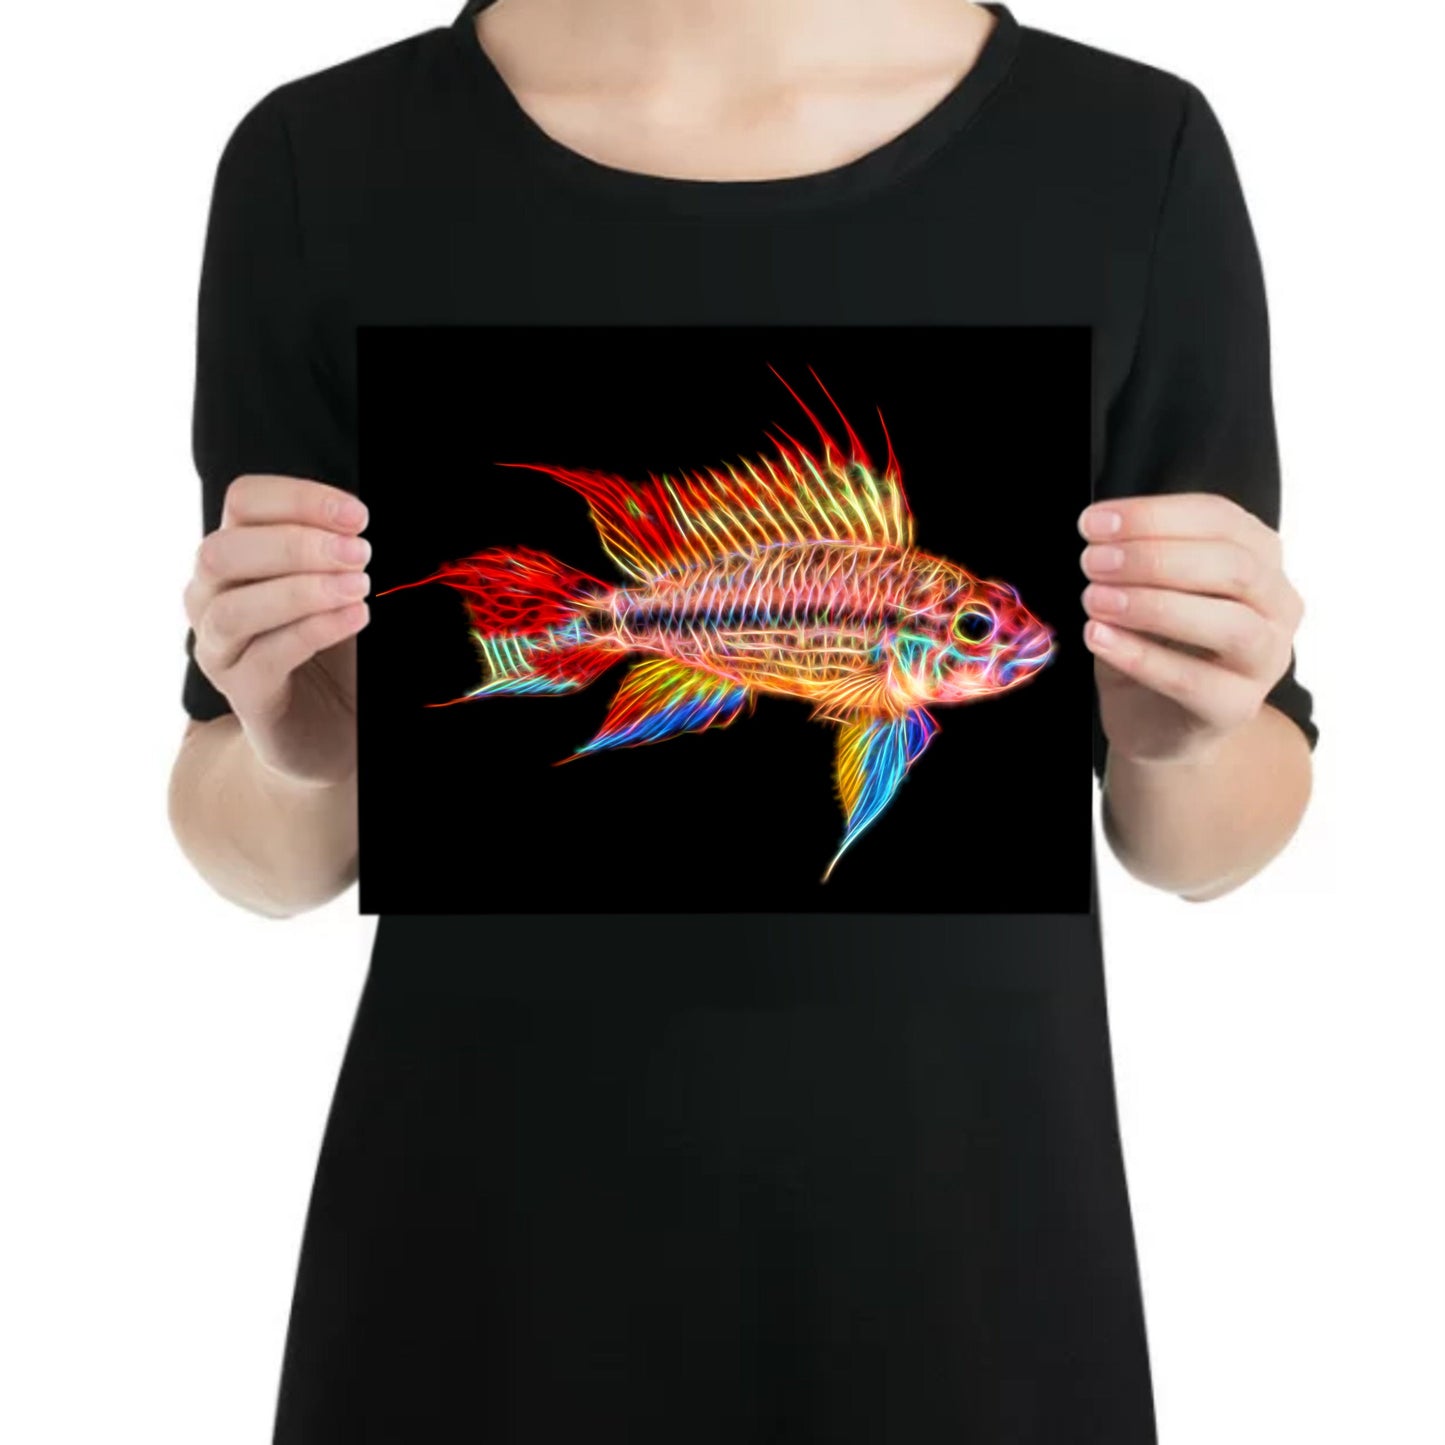 Super Red Cockatoo Dwarf Cichlid Fish Print with Stunning Fractal Art Design. Size 8 x 10 inches